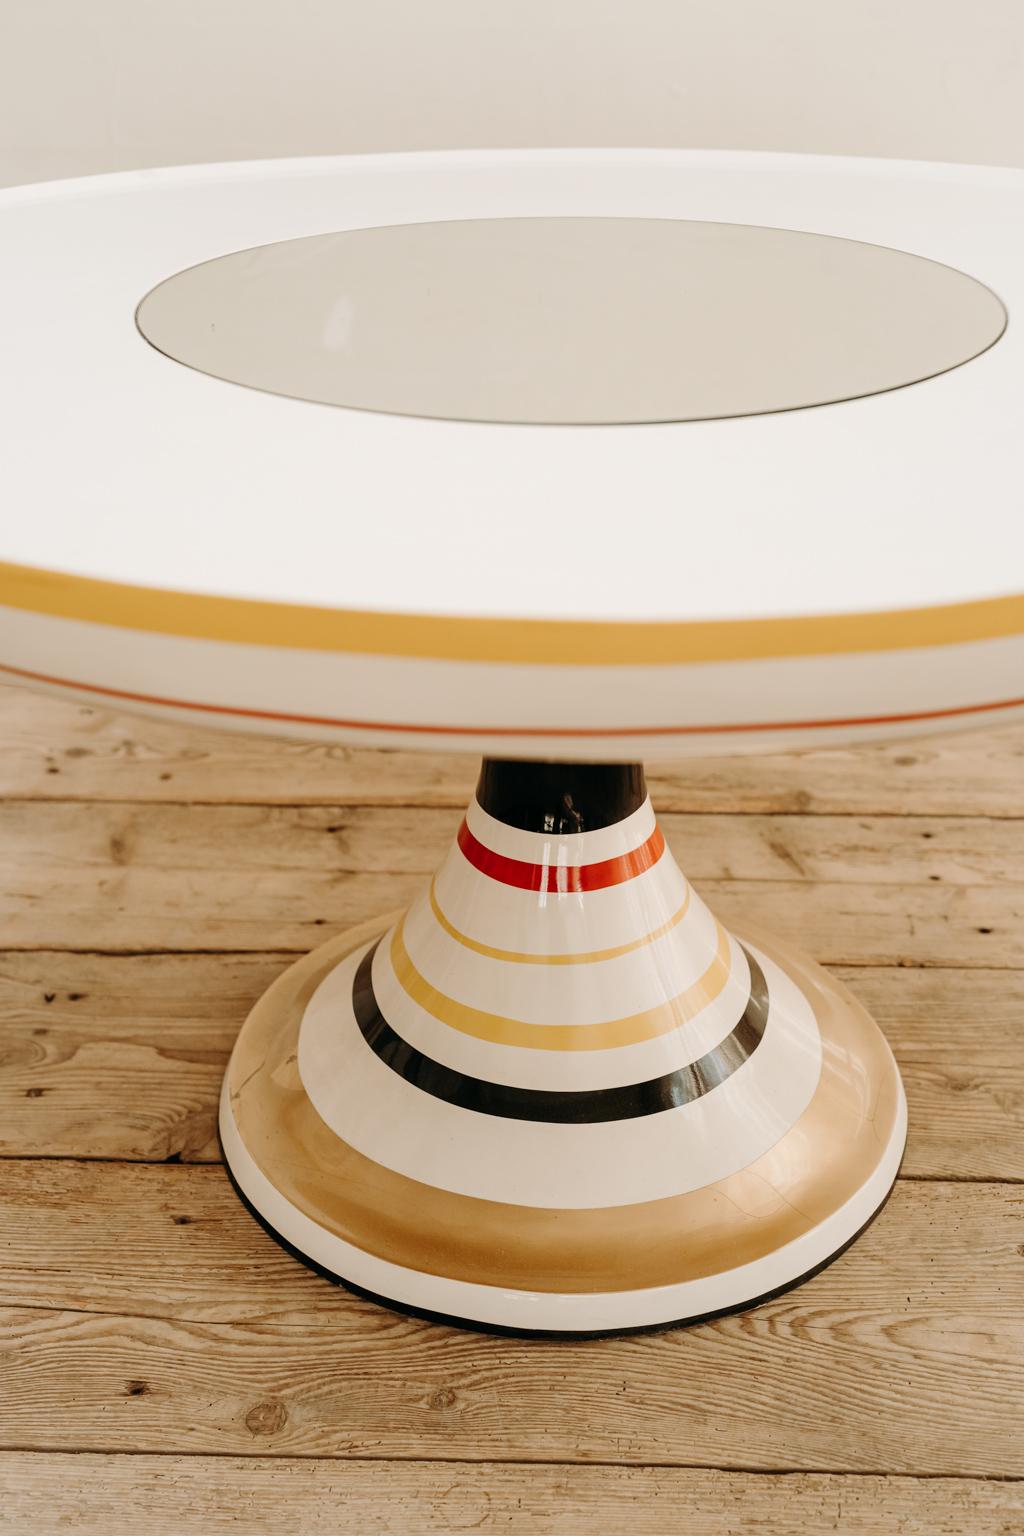 Contemporary Colorful Round Pedestal Table by Valentina Audrito